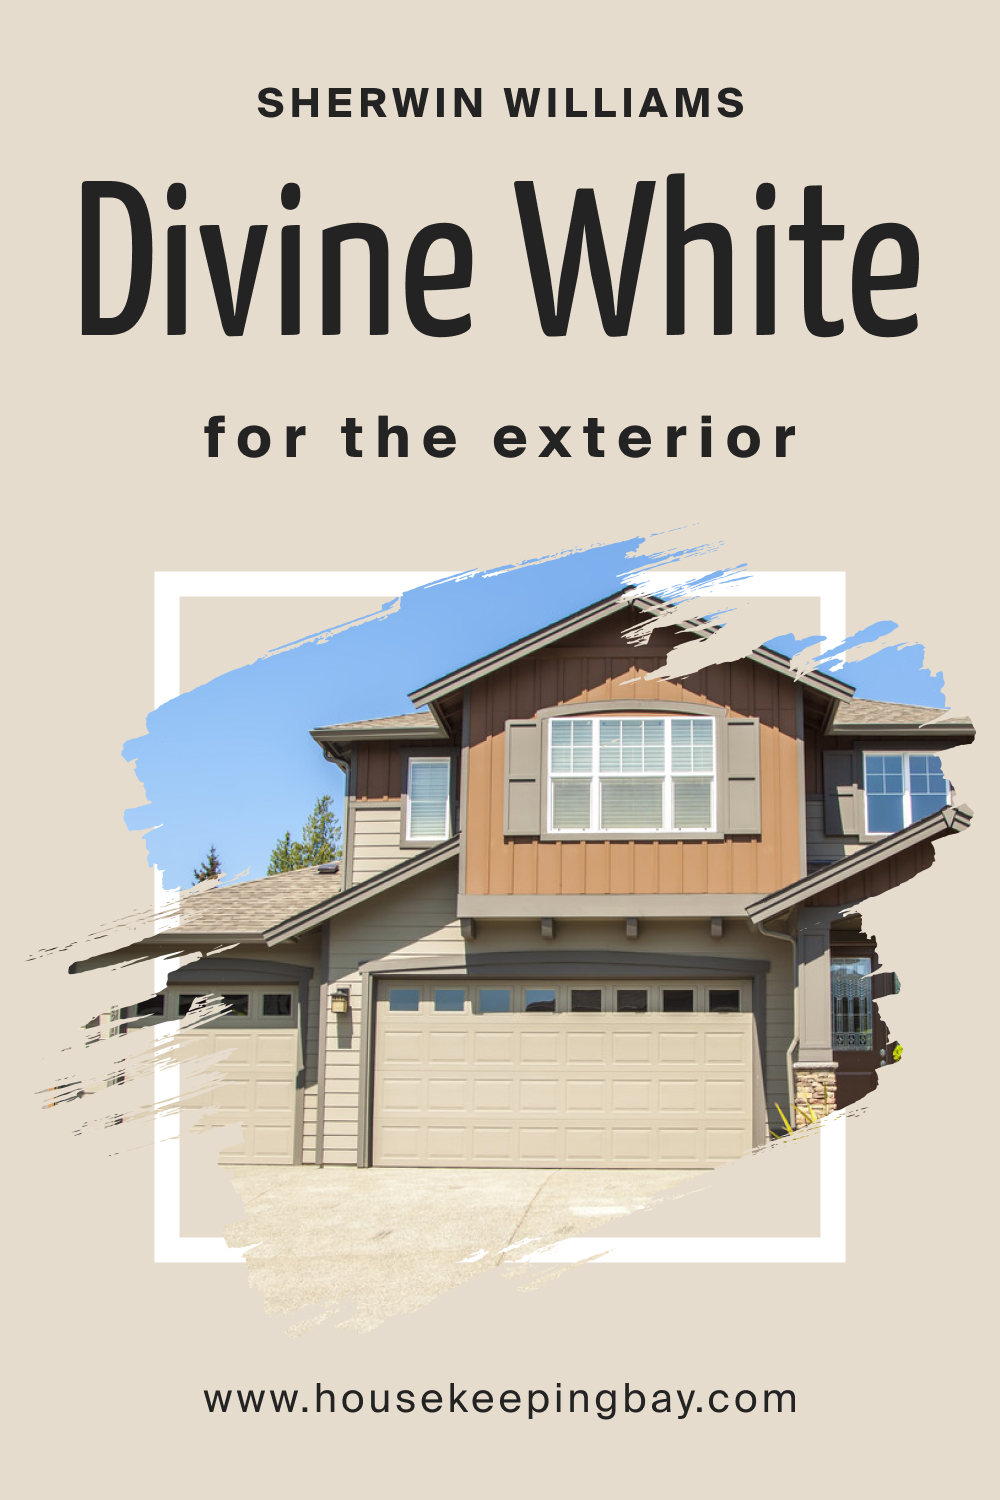 Sherwin Williams. SW Divine White For the exterior